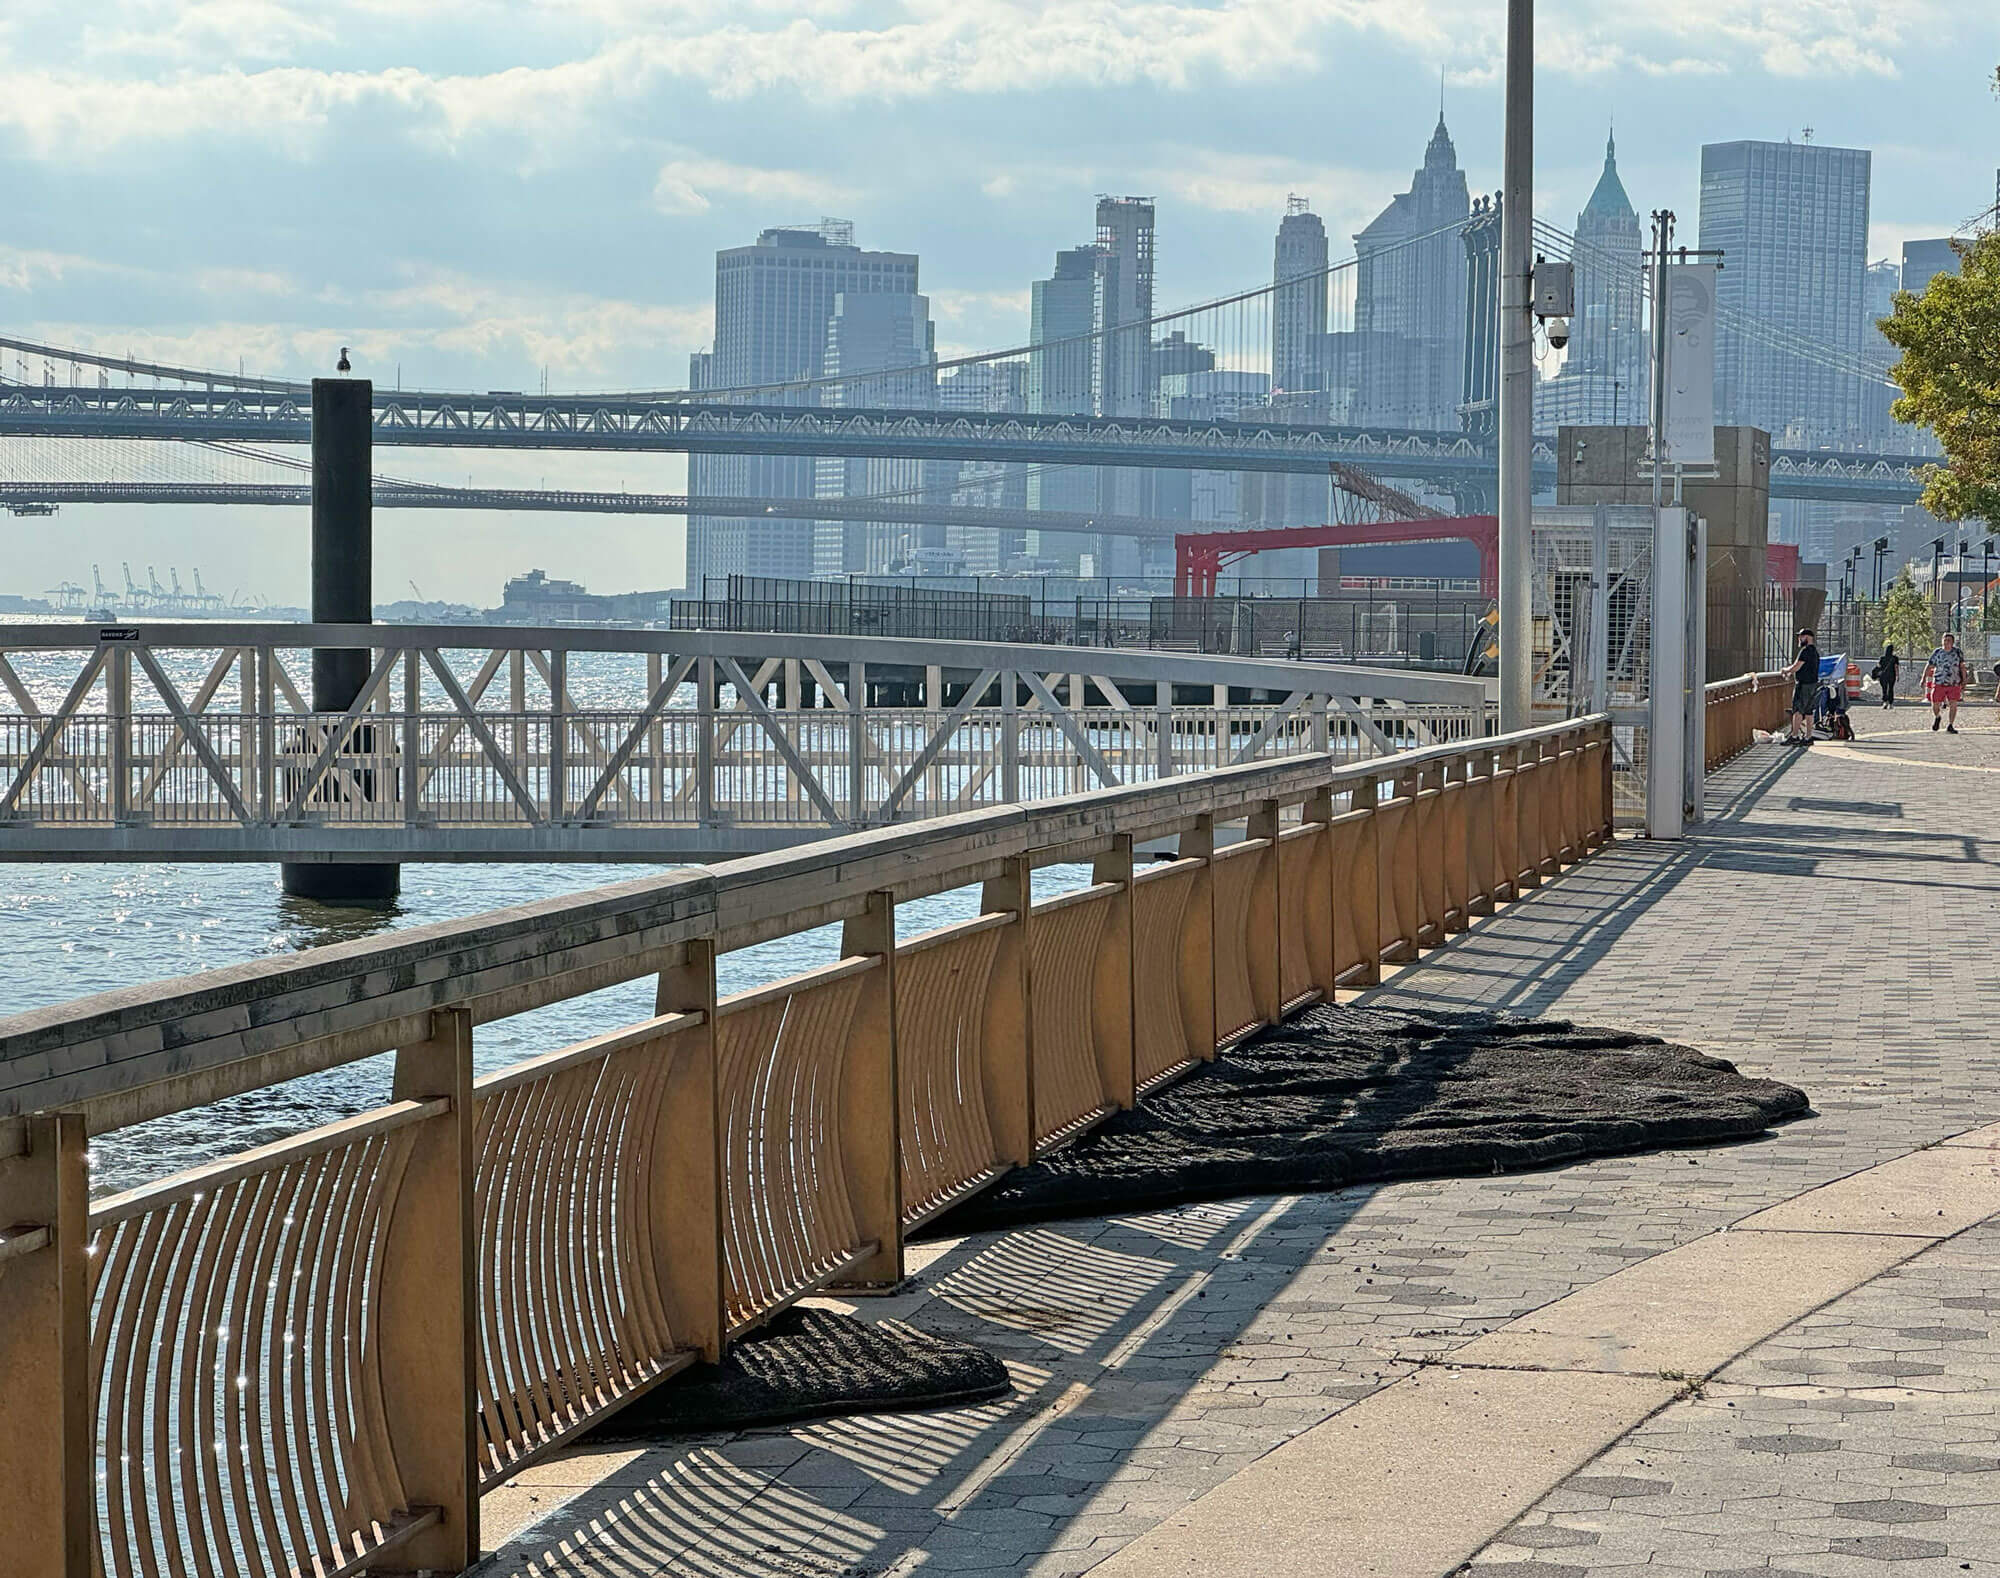 Fence on the East River with asphalt sculpture on the floor.